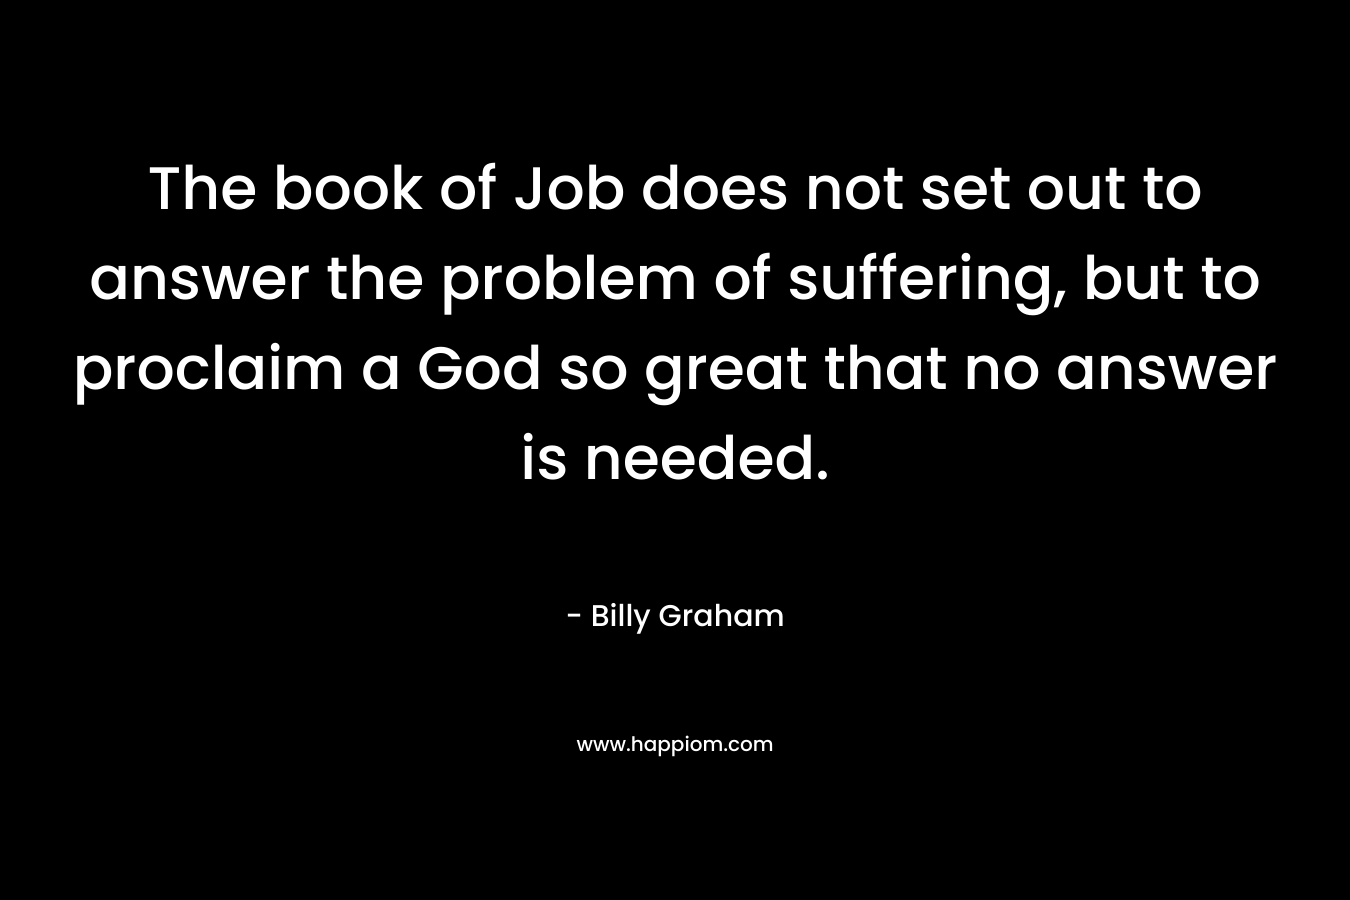 The book of Job does not set out to answer the problem of suffering, but to proclaim a God so great that no answer is needed. – Billy Graham